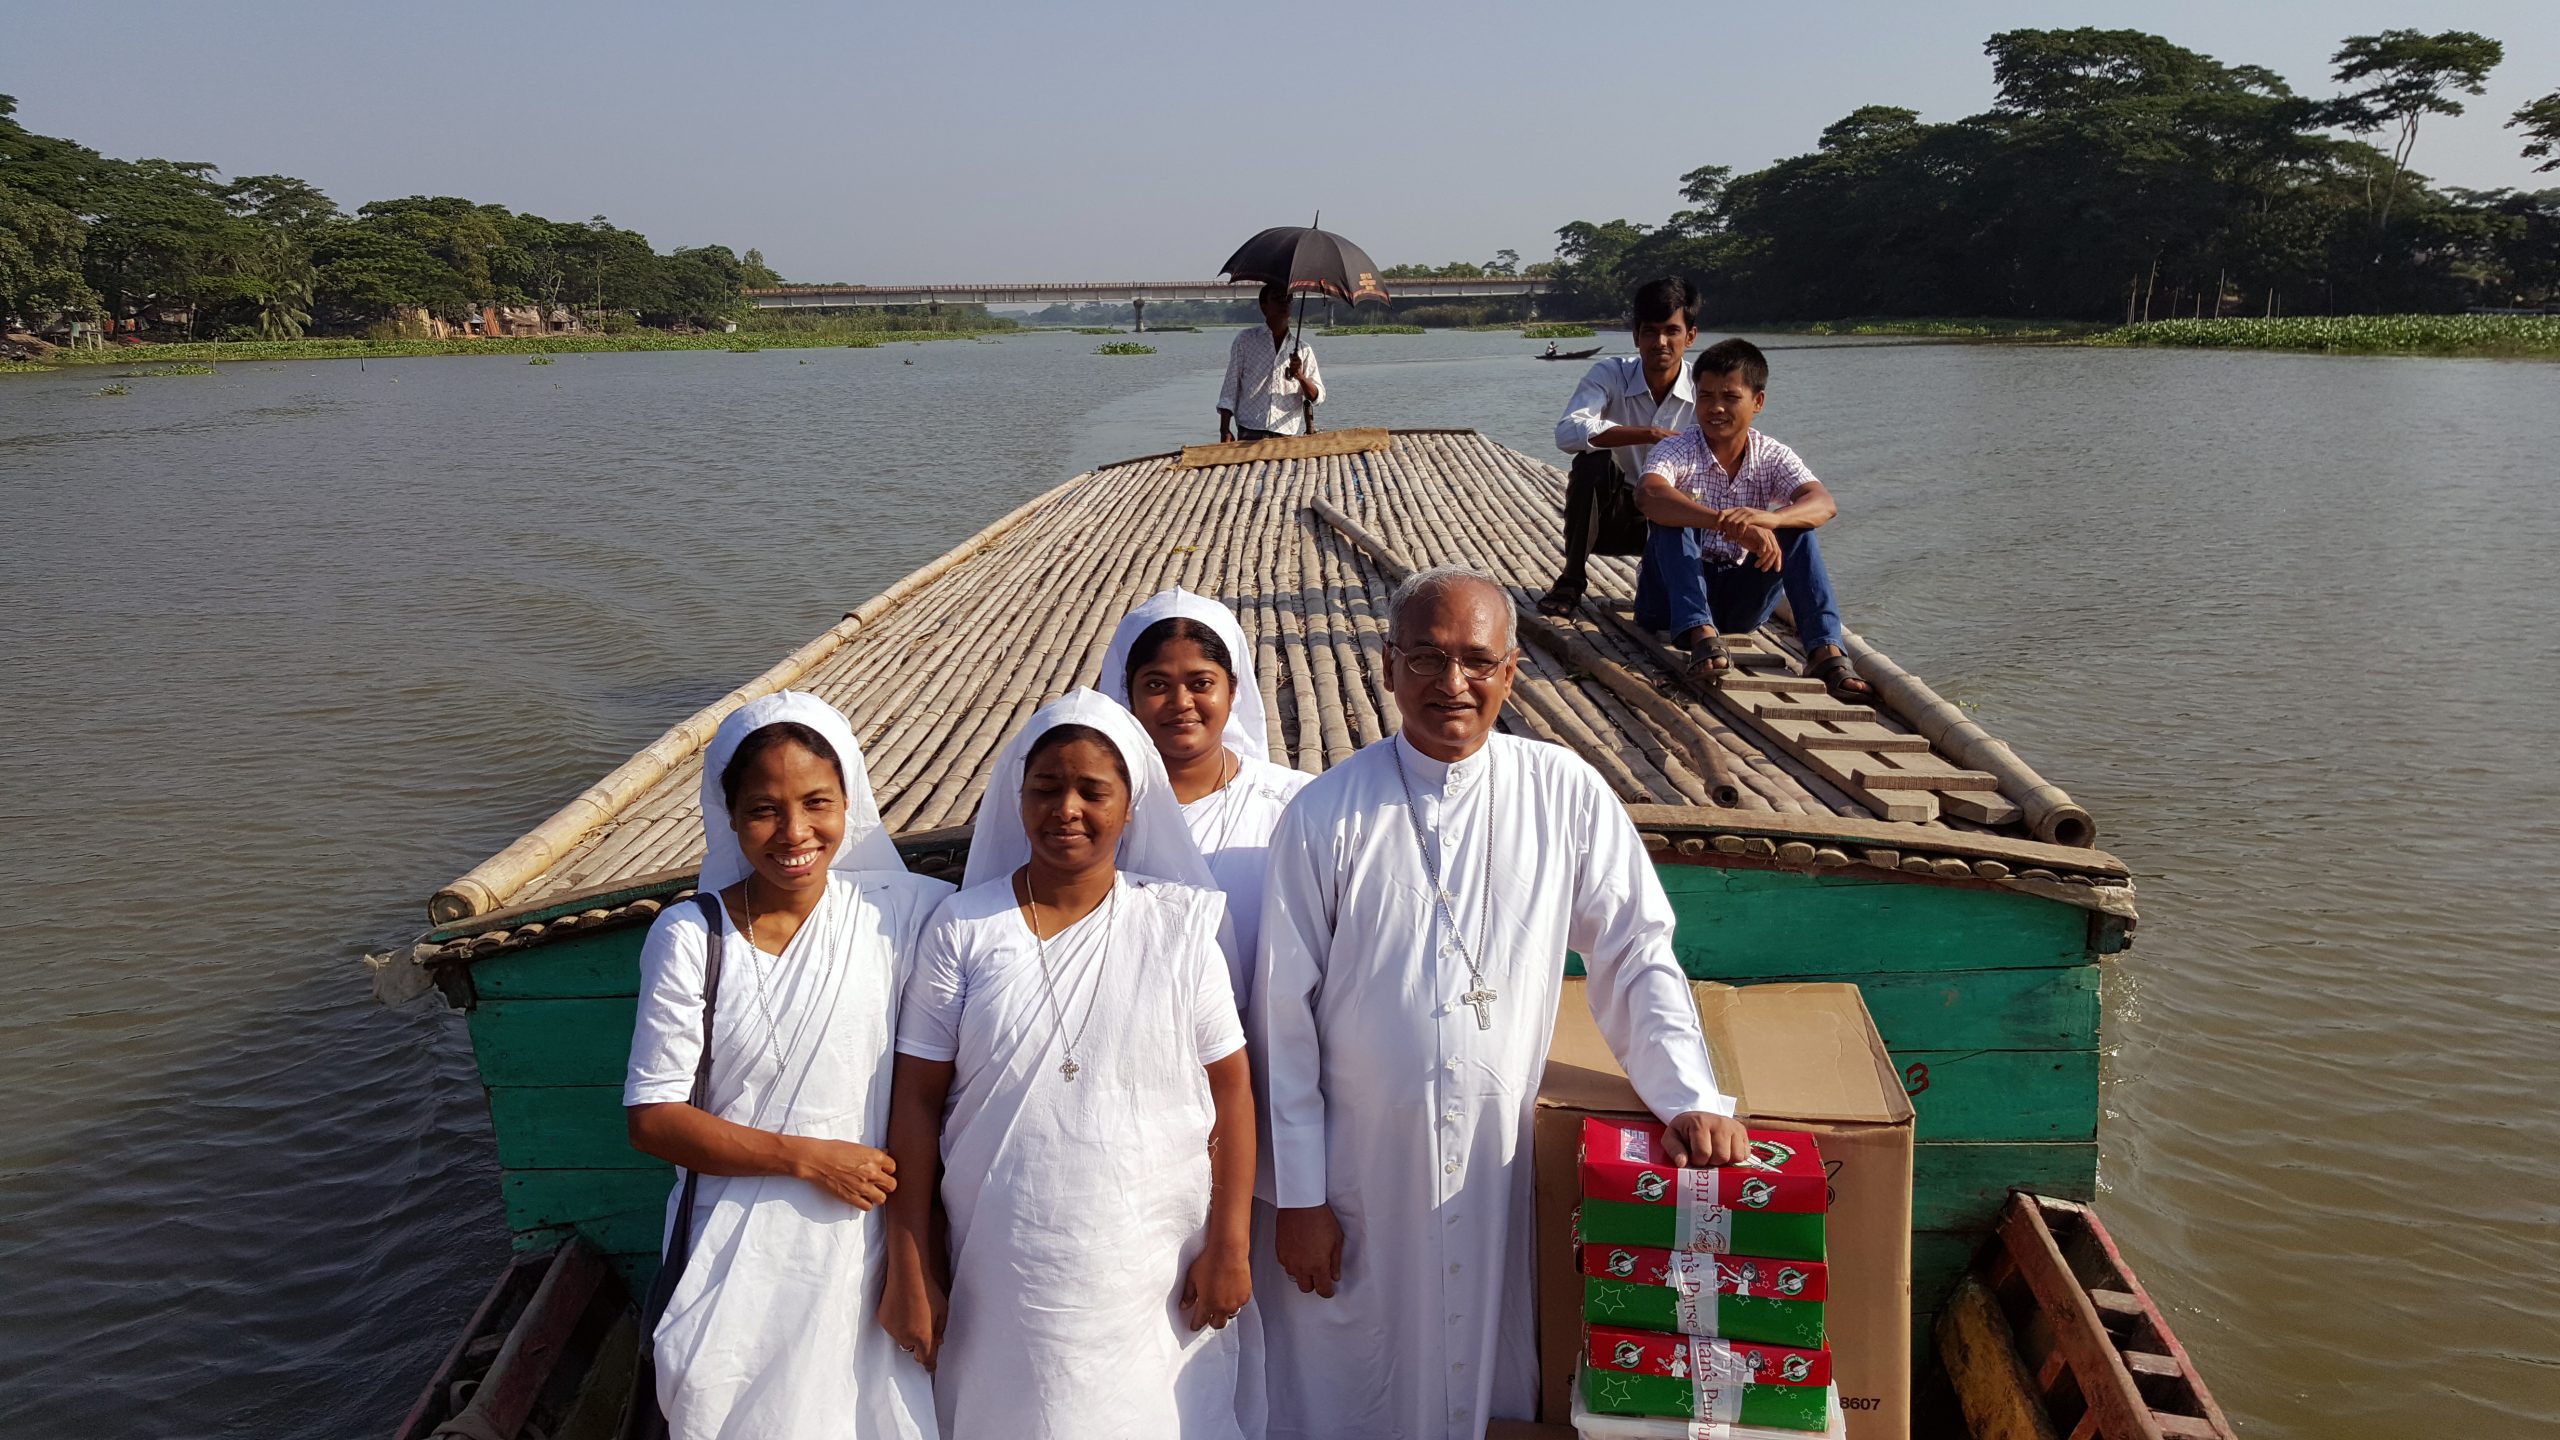 Archbishop Moses Costa of Chittagong Archdiocese with religious Sisters, Bangladesh (Image © Aid to the Church in Need)